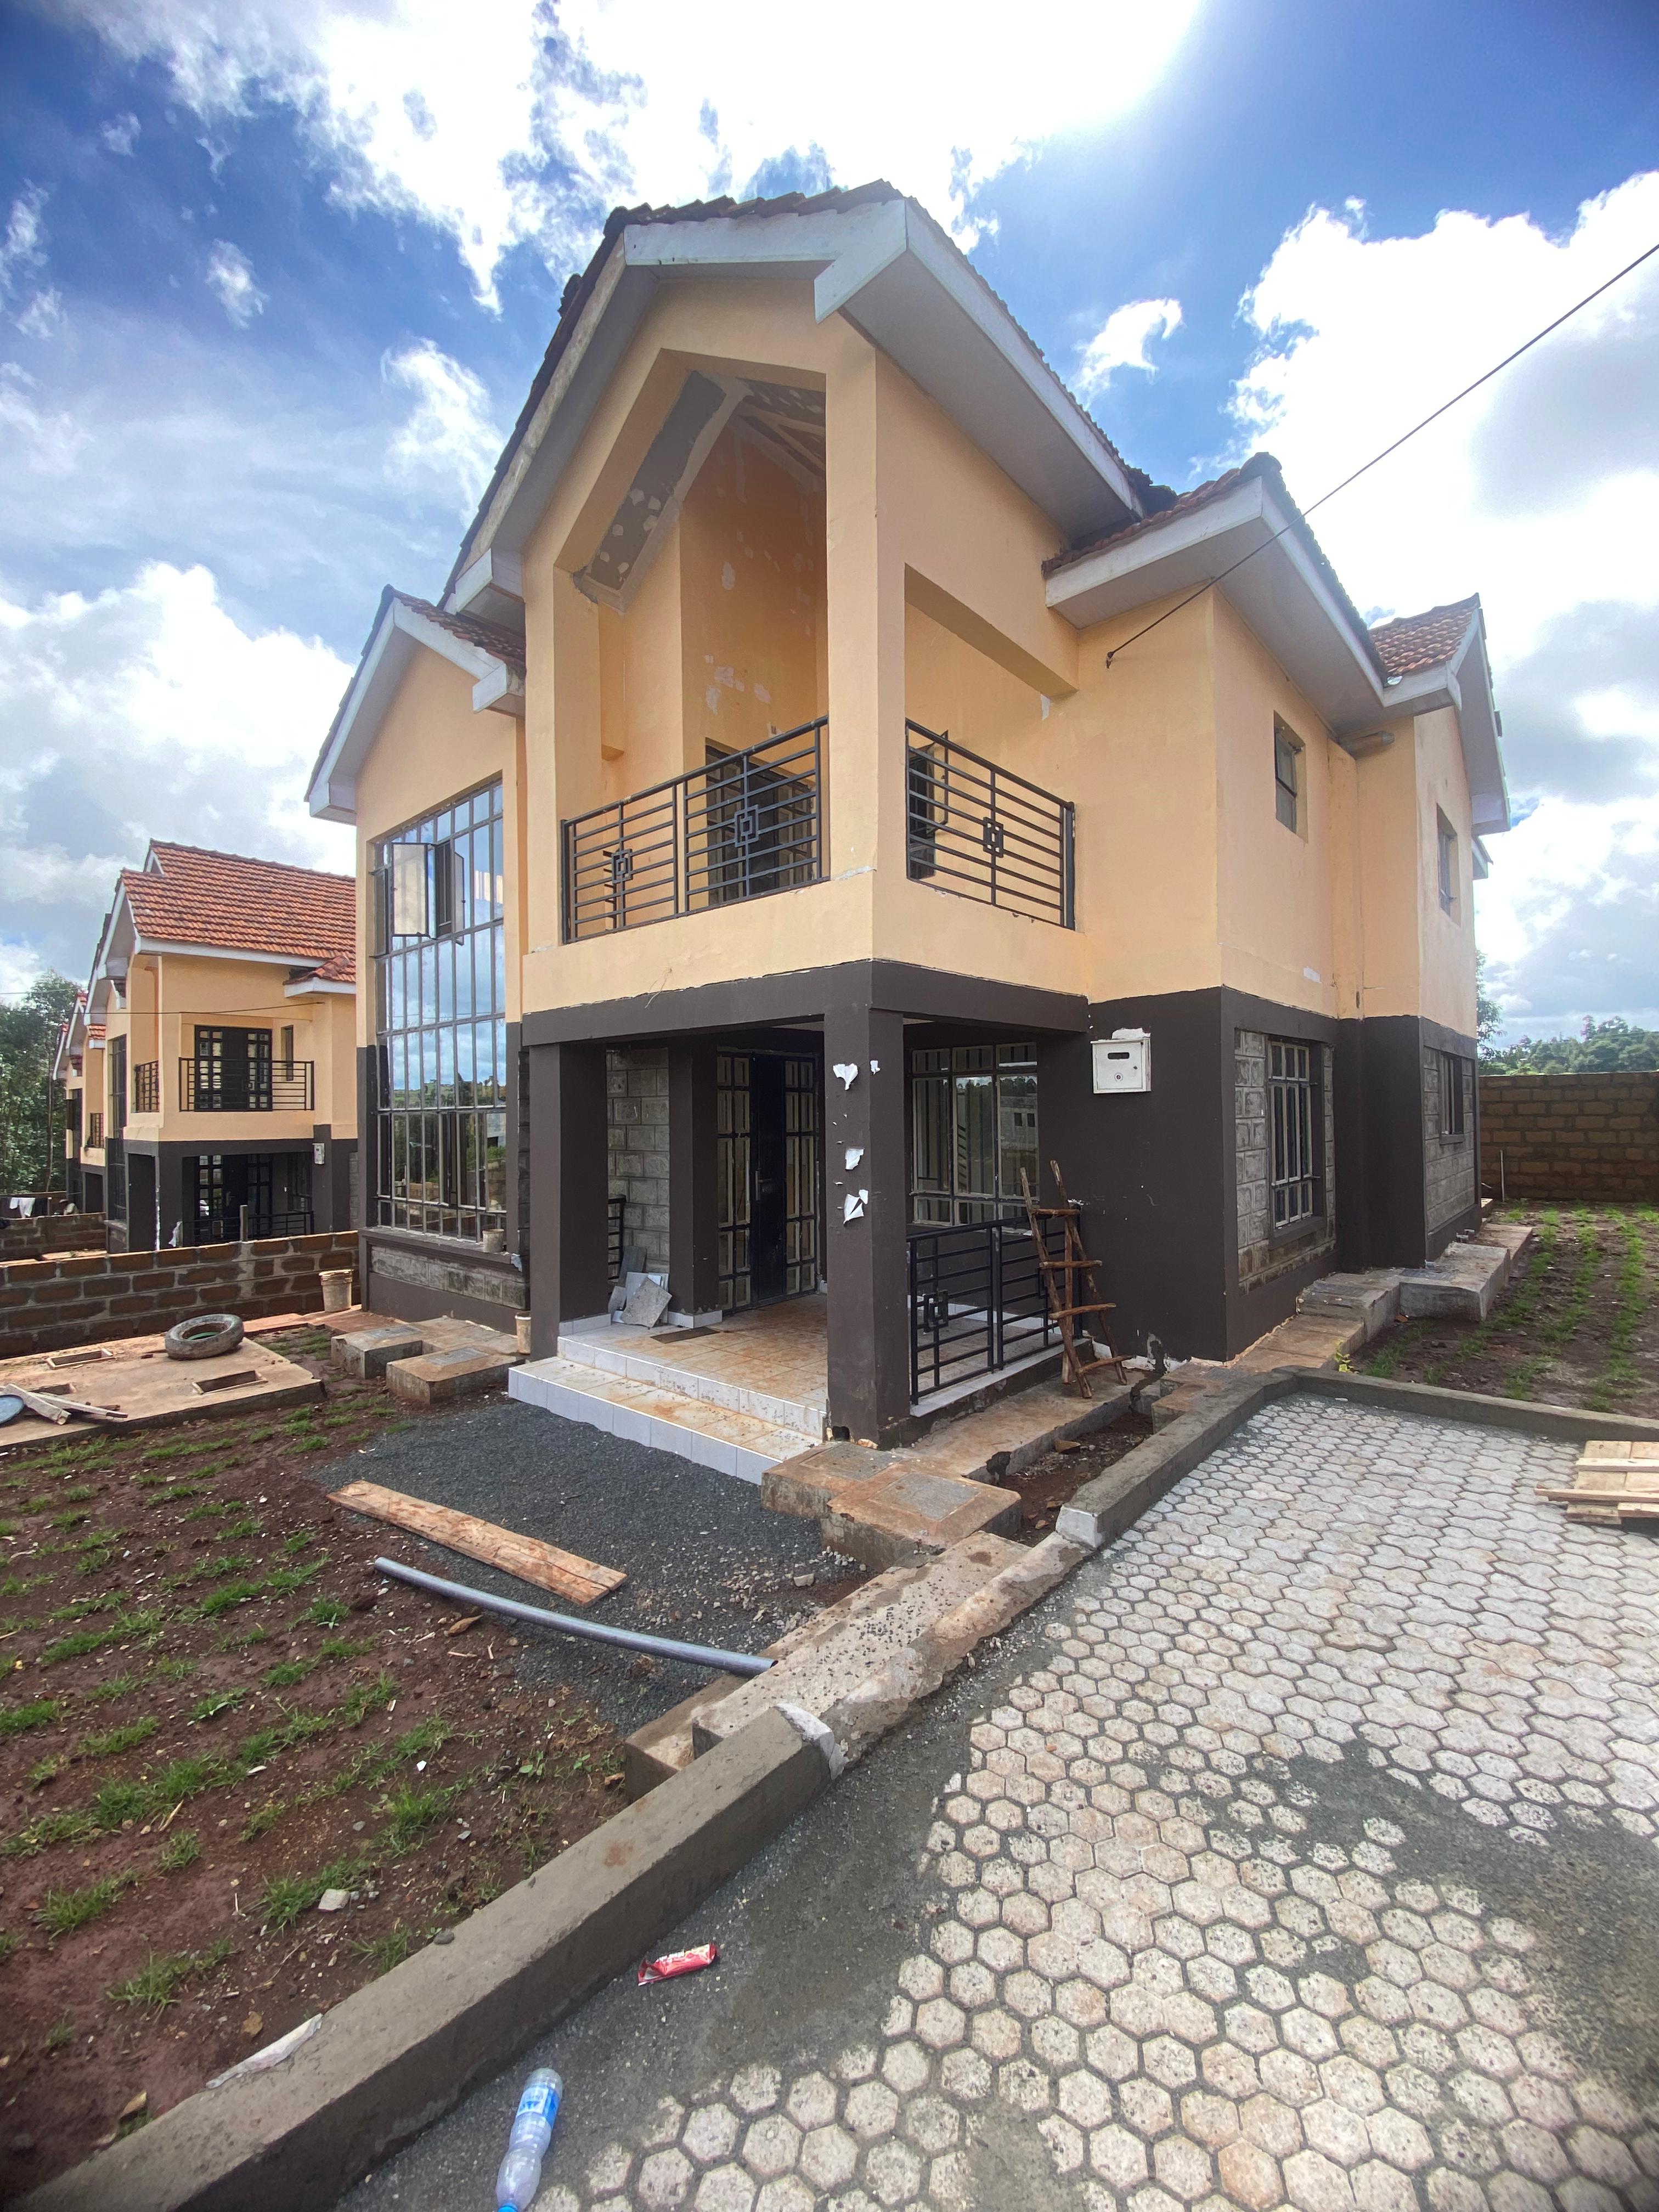 Spacious 4 Bedroom Townhouse For Sale in Gikambura, Kikuyu. With Garden, 1/8 plot, and Ready Title Deed. Asking Price: 13M. Musilli Homes.